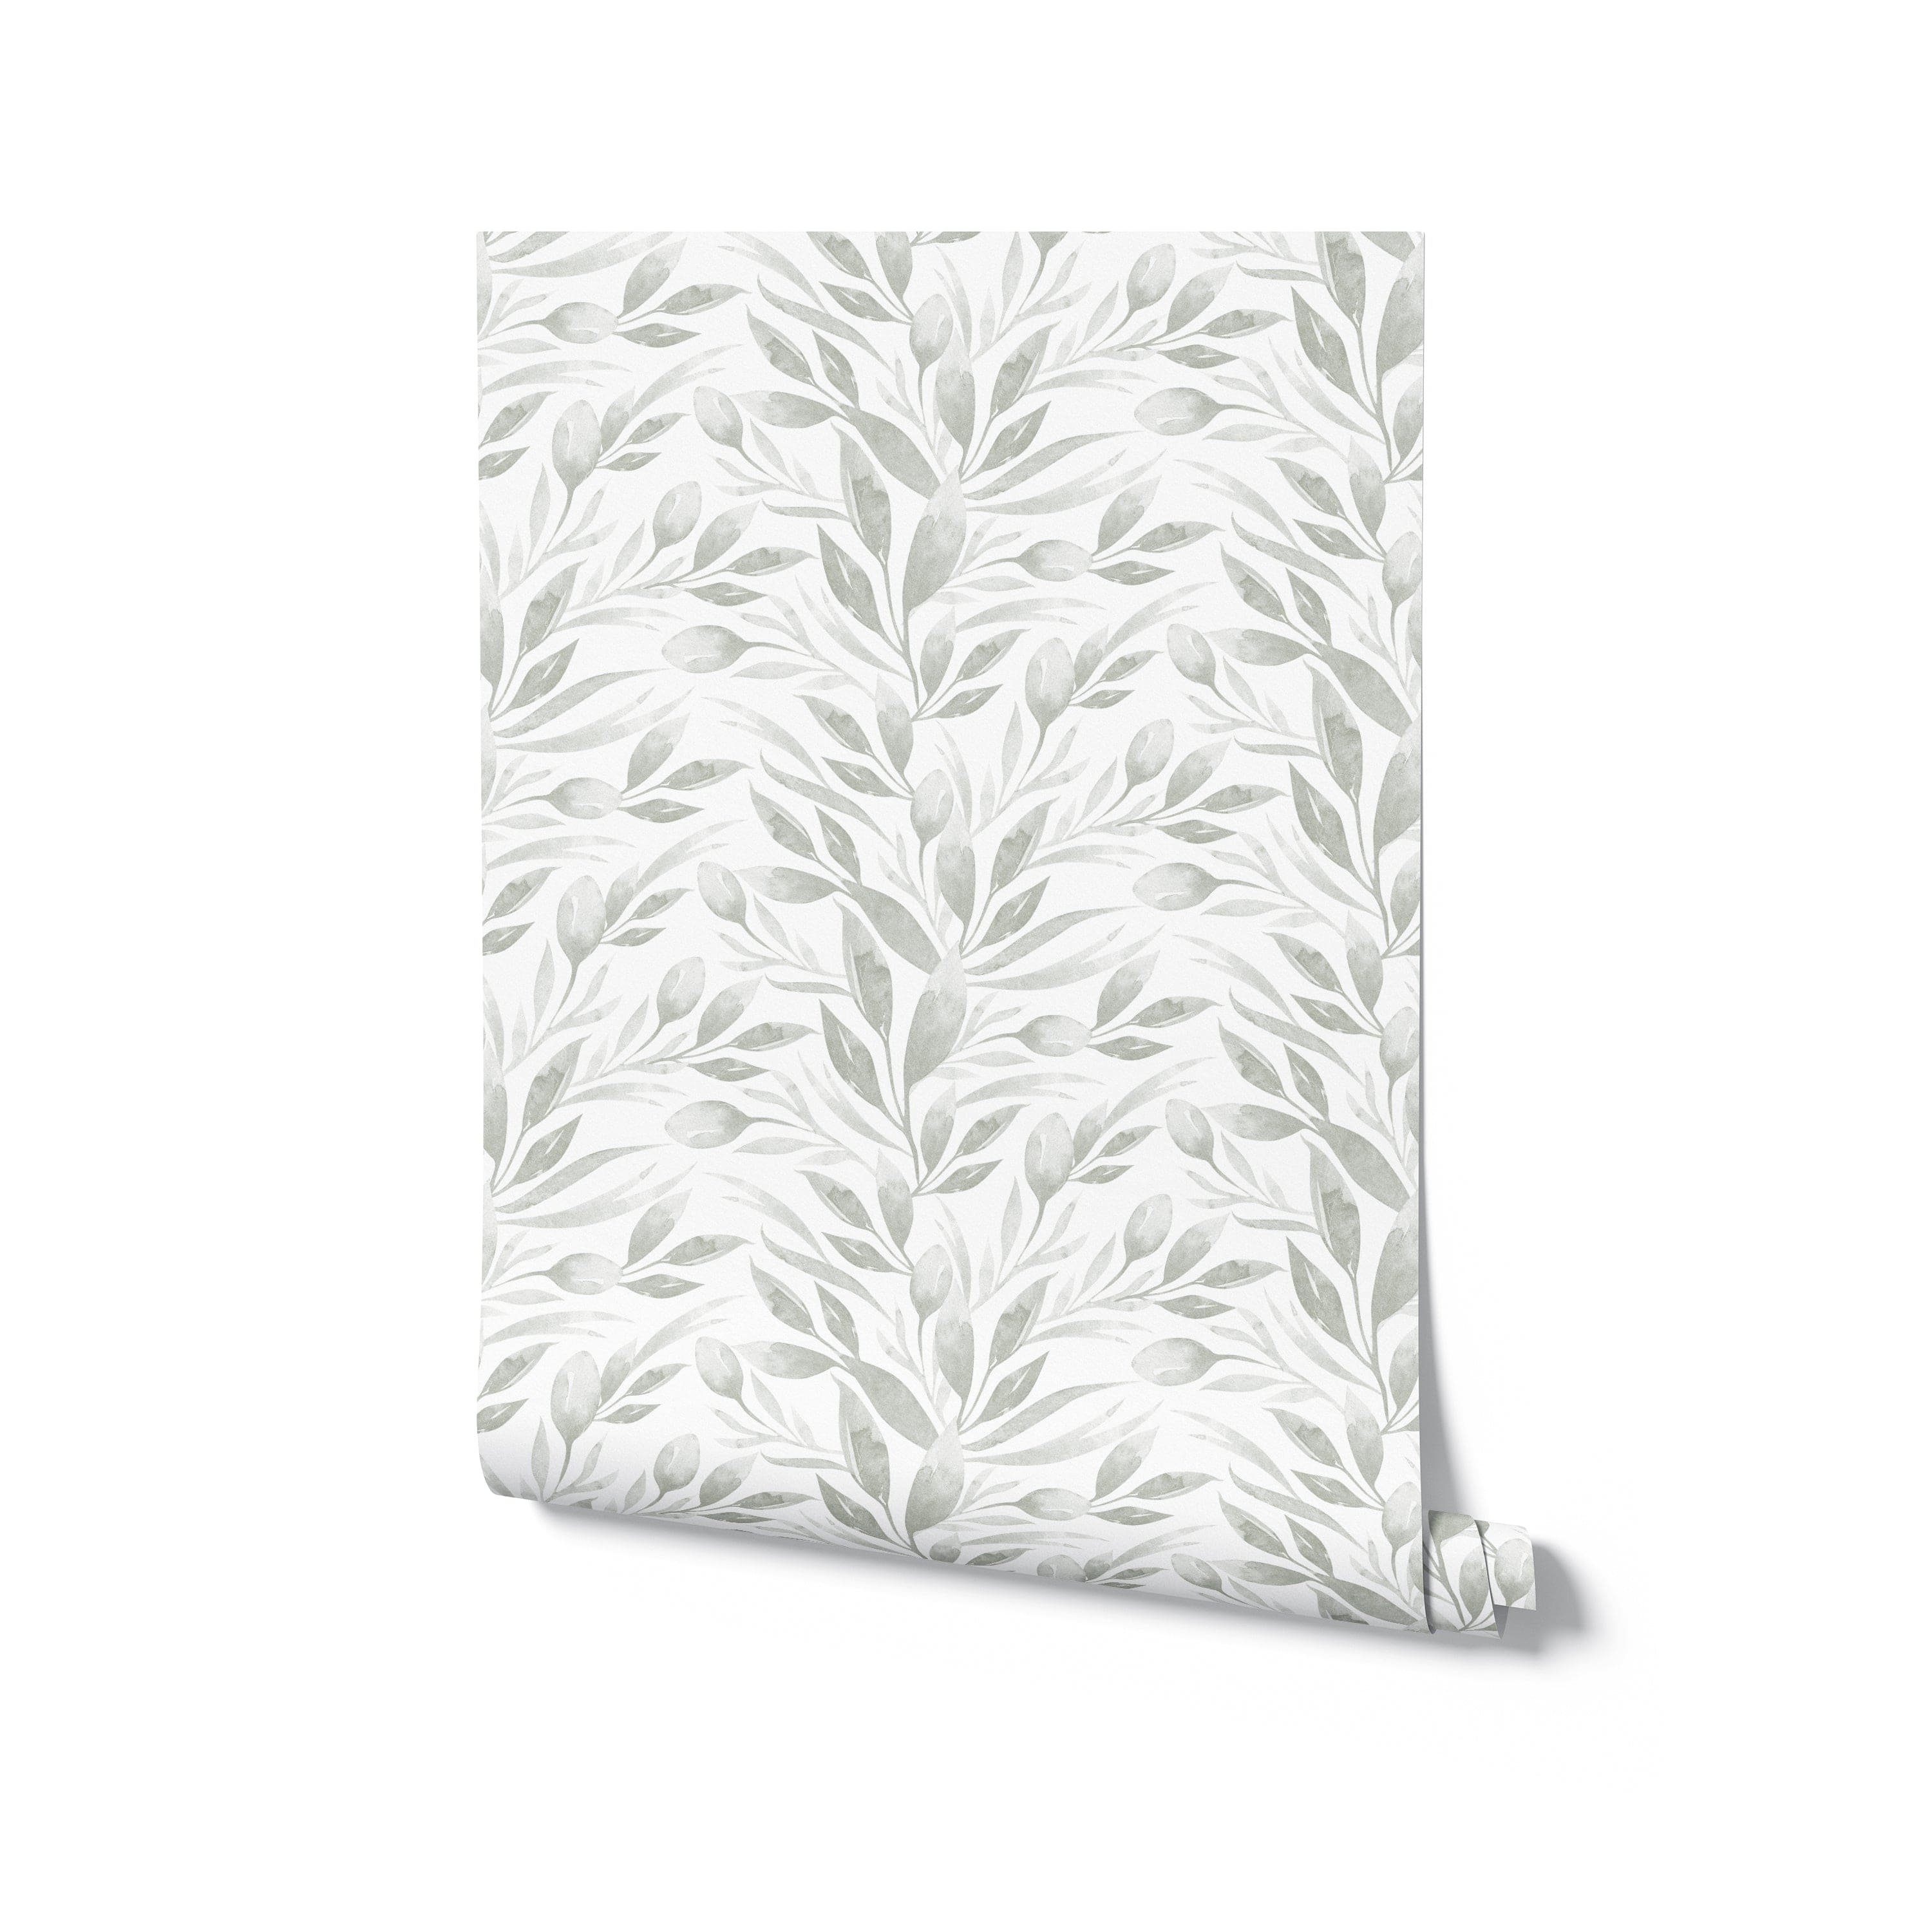 A roll of Watercolour Spring Leaf Wallpaper partially unrolled, revealing a detailed pattern of delicate leaves in watercolour shades of green and gray, offering a fresh and airy look to any interior